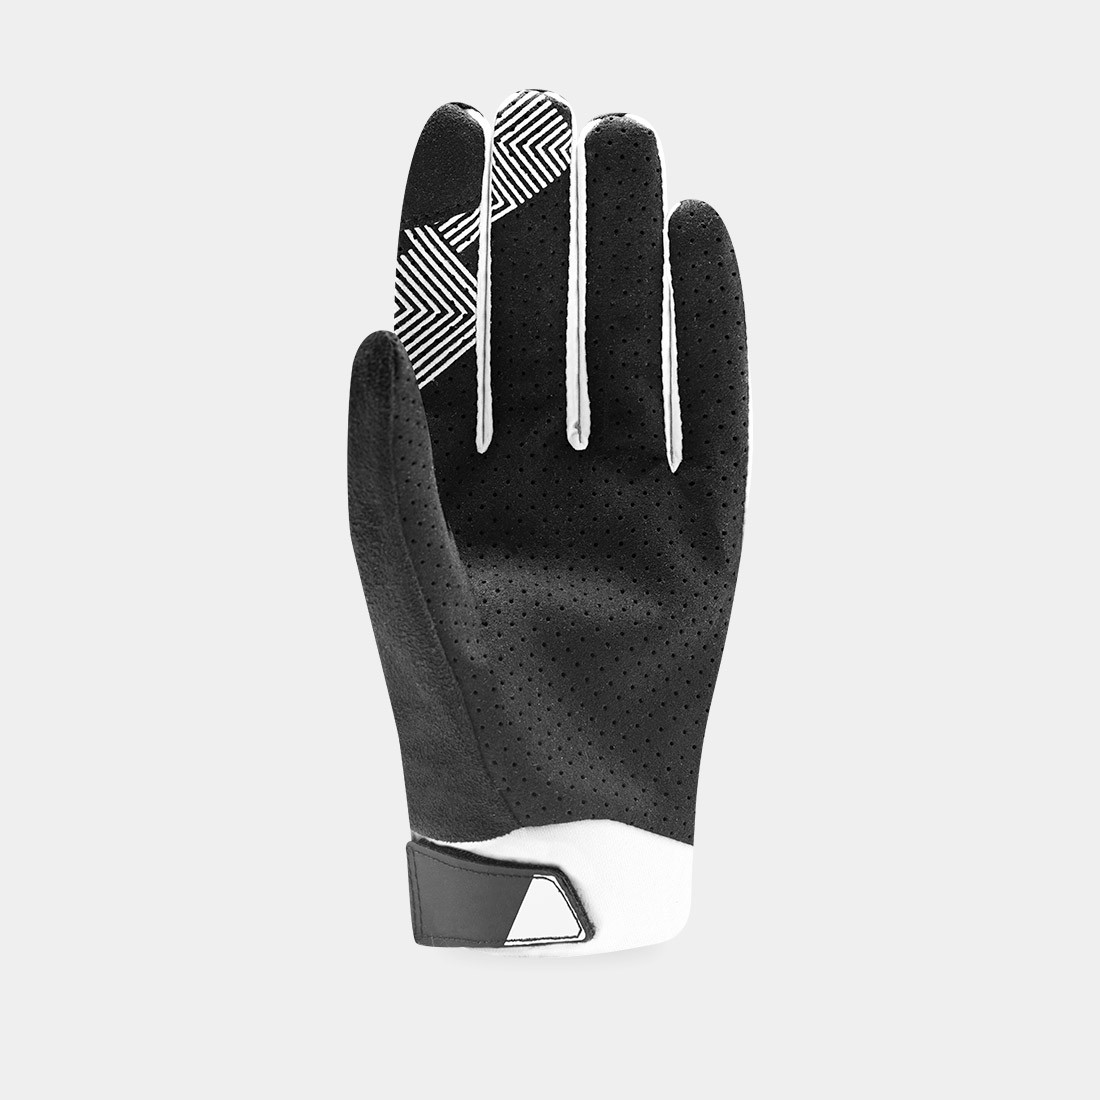 GP STYLE 2 - CYCLING GLOVES